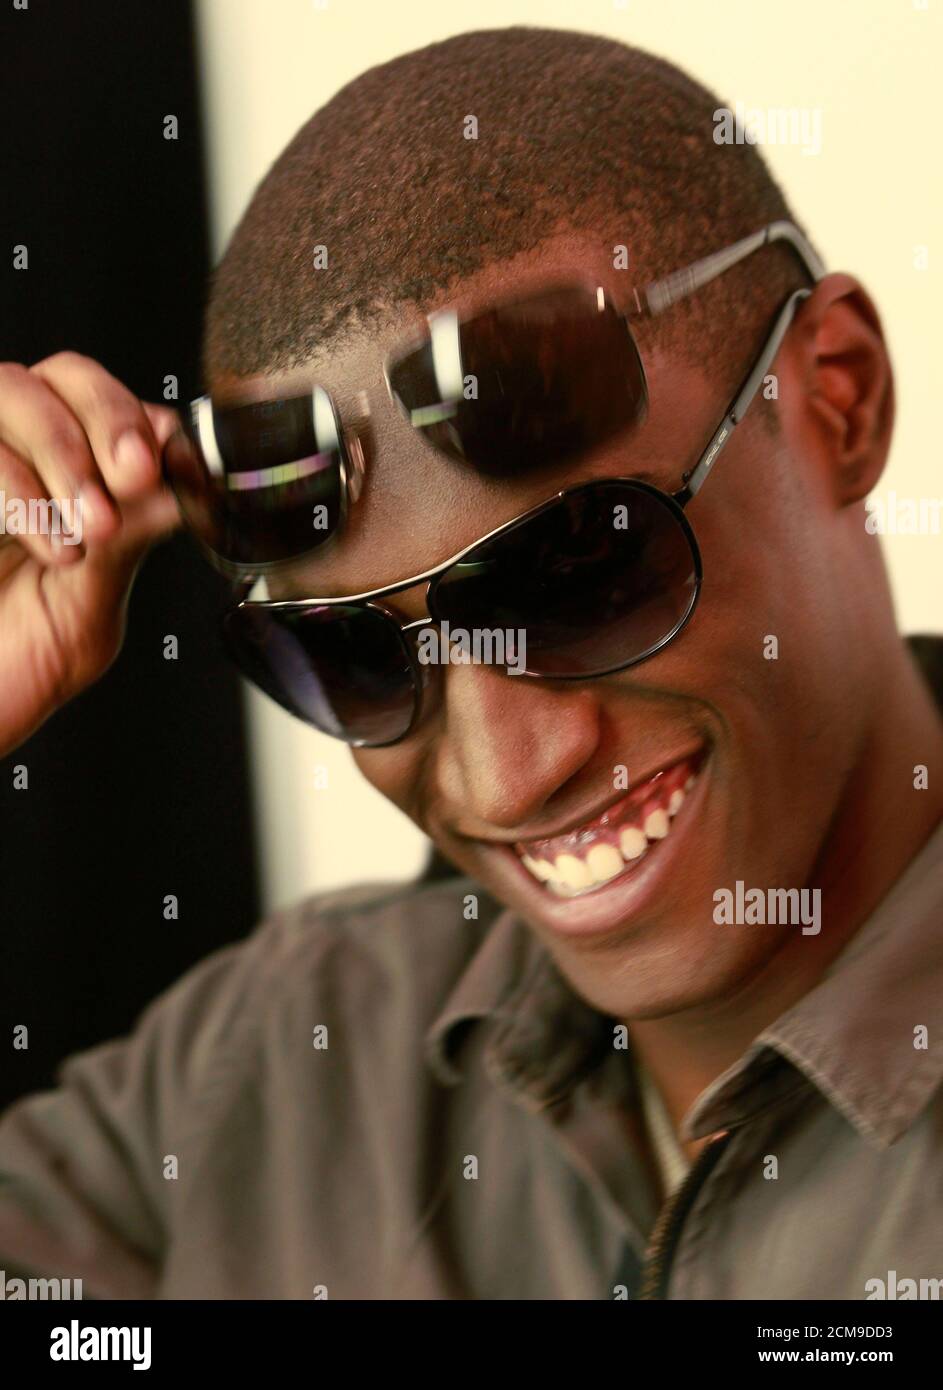 A model tests different sunglasses backstage before the Michael Kors Spring  2011 collection during New York Fashion Week September 15, 2010.  REUTERS/Brendan McDermid (UNITED STATES - Tags: FASHION Stock Photo - Alamy